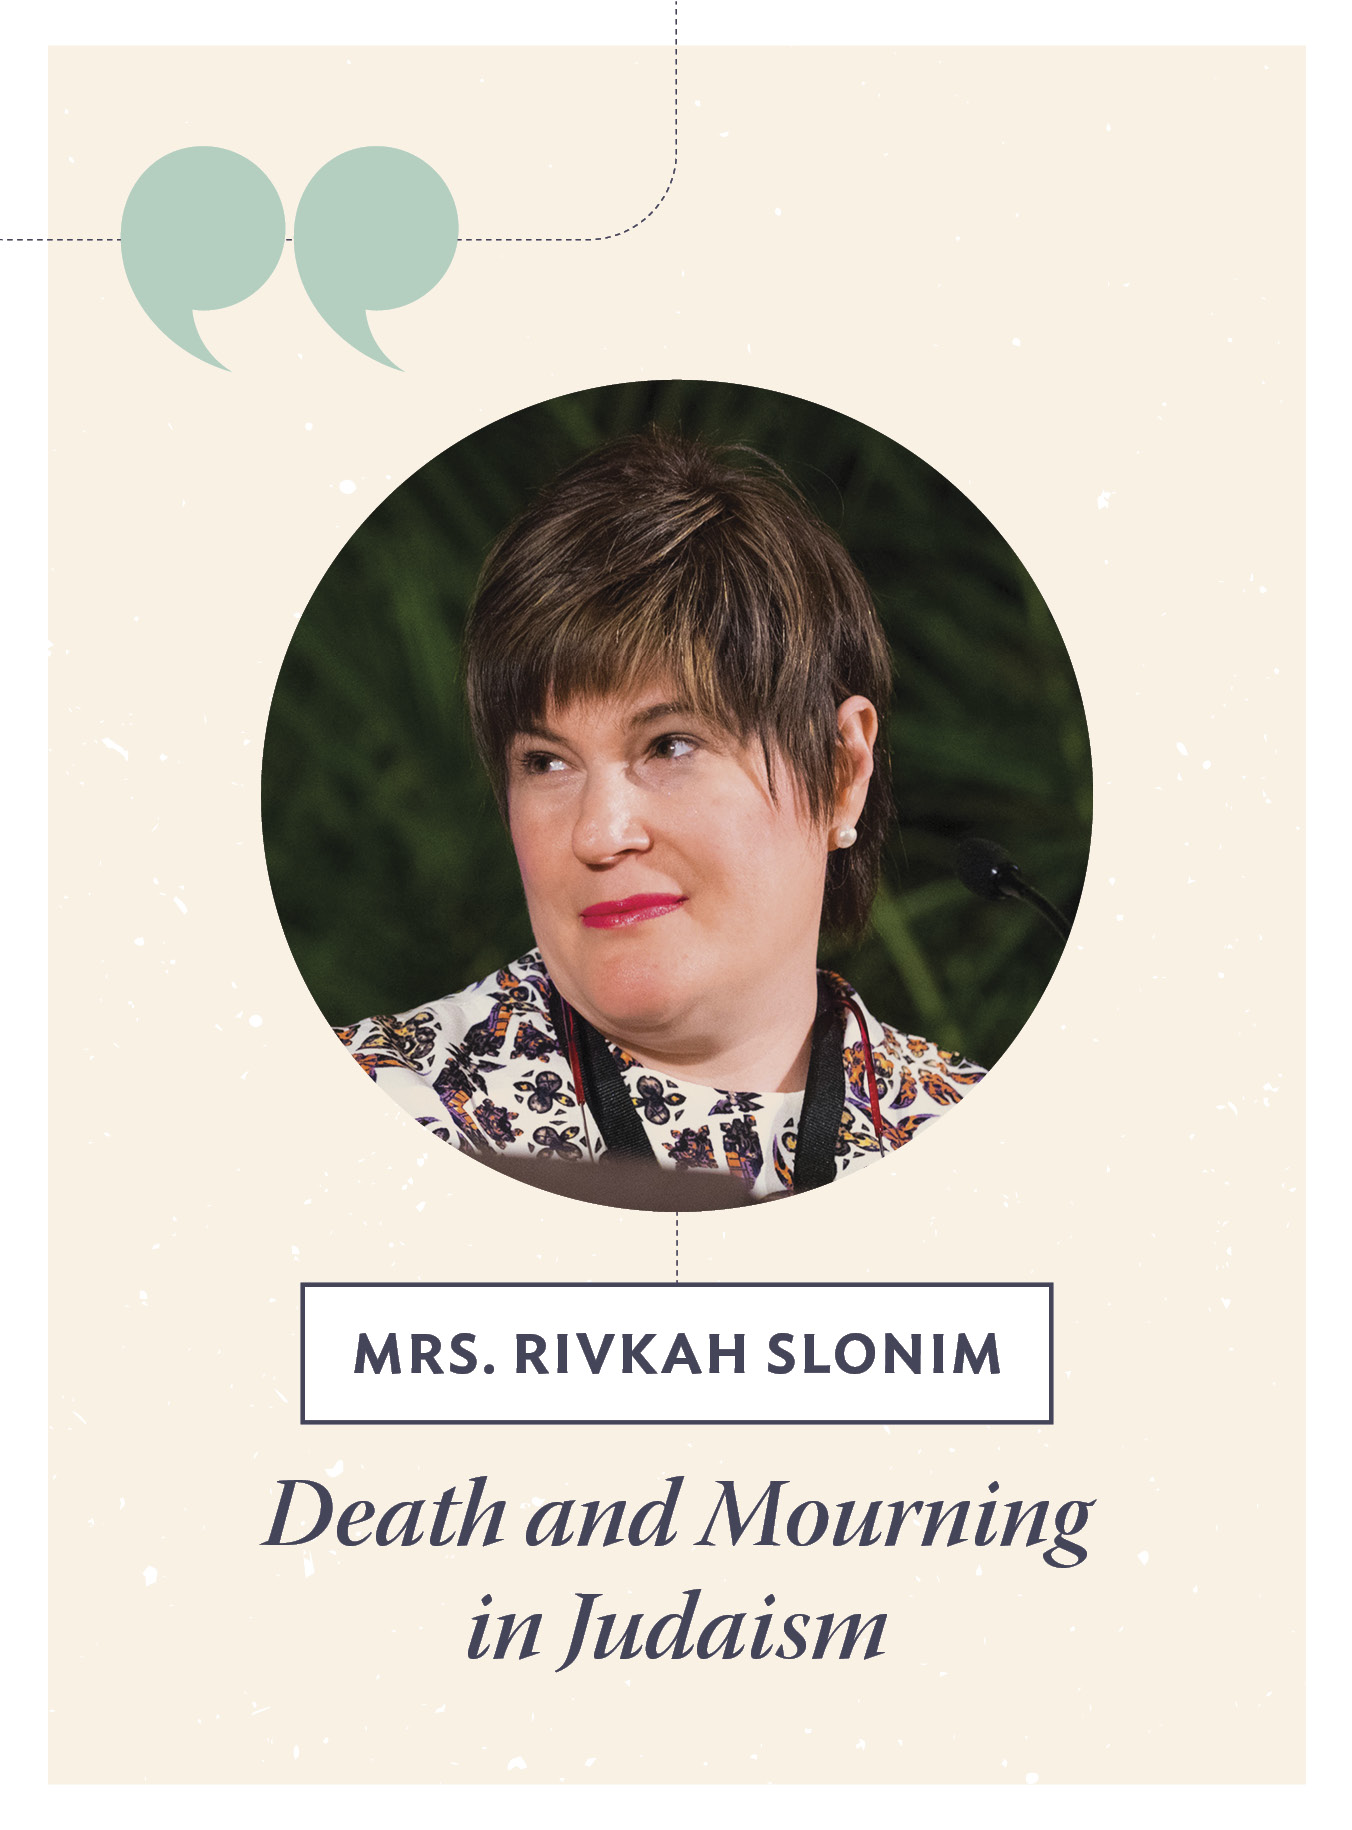 Death and Mourning in Judaism - Mrs. Rivkah Slonim